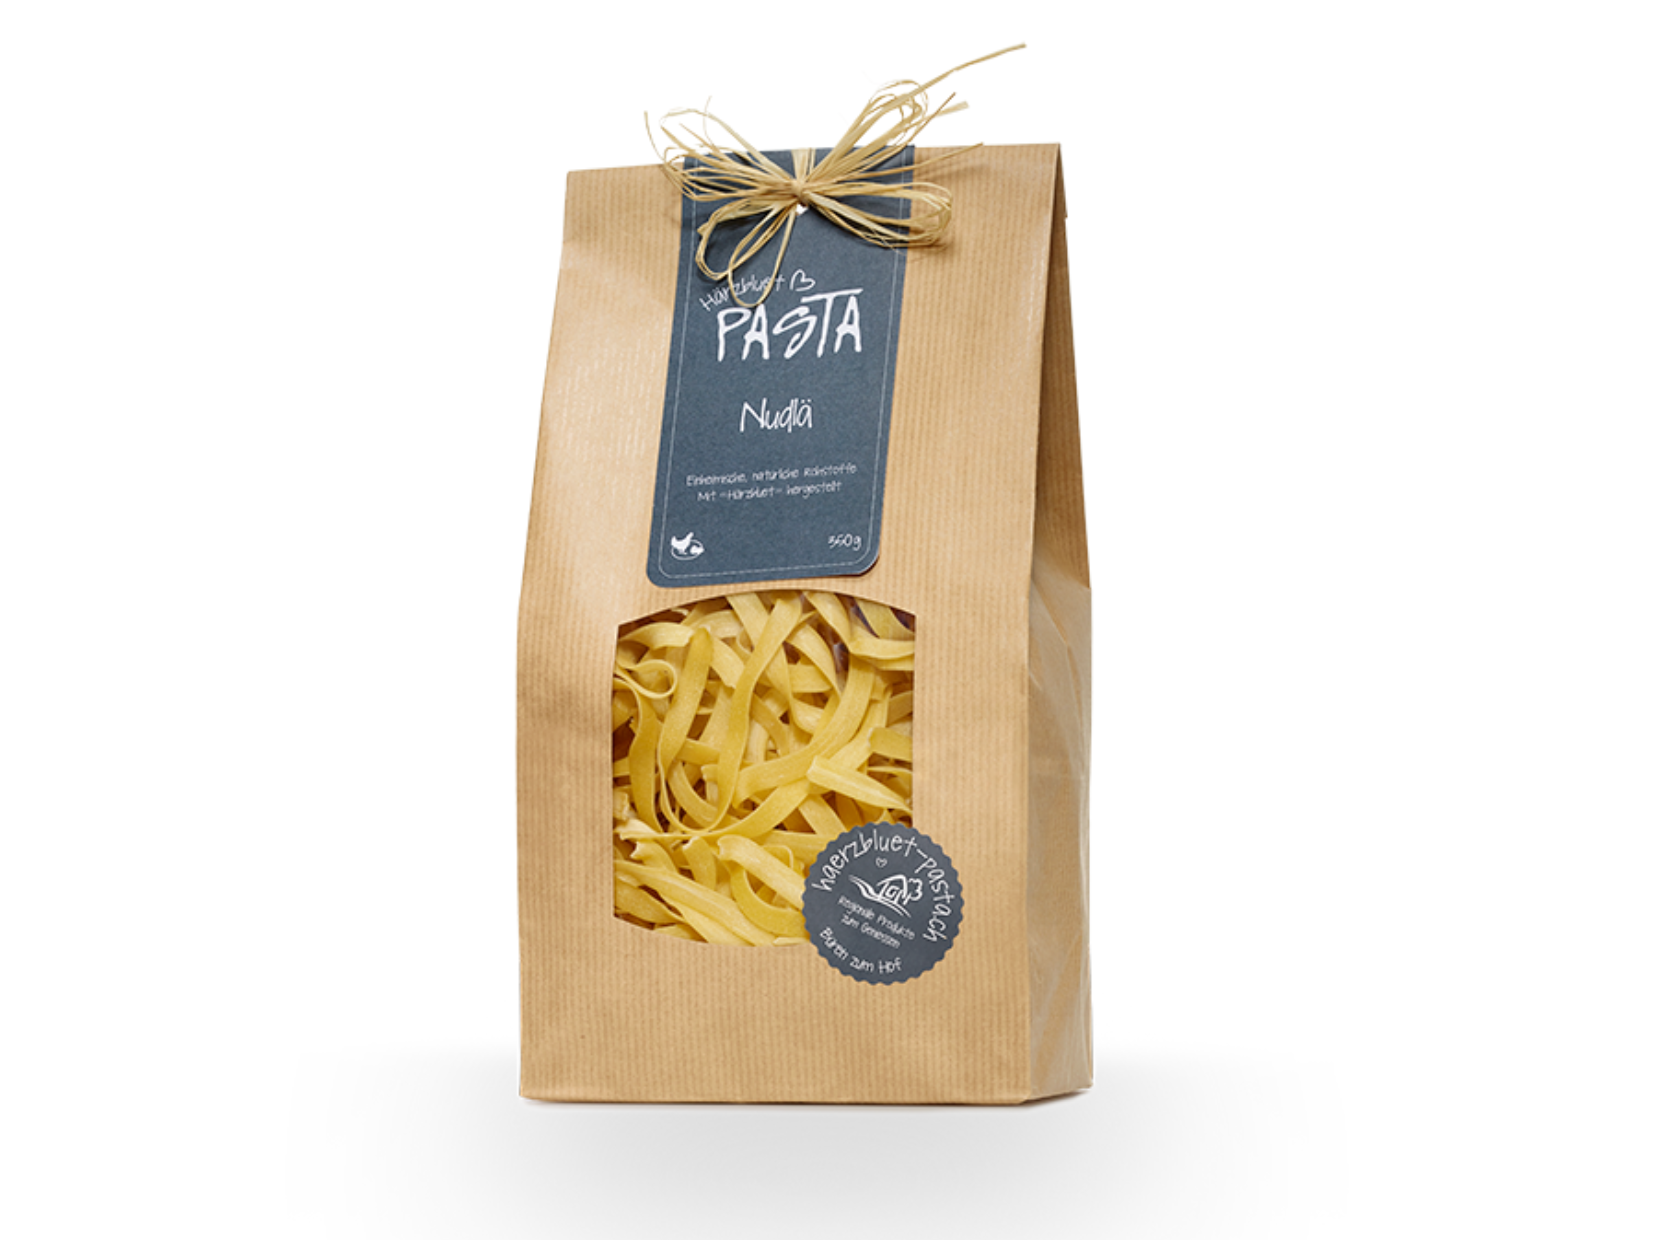  Noodles (350g), artisanal product for direct sale in Switzerland